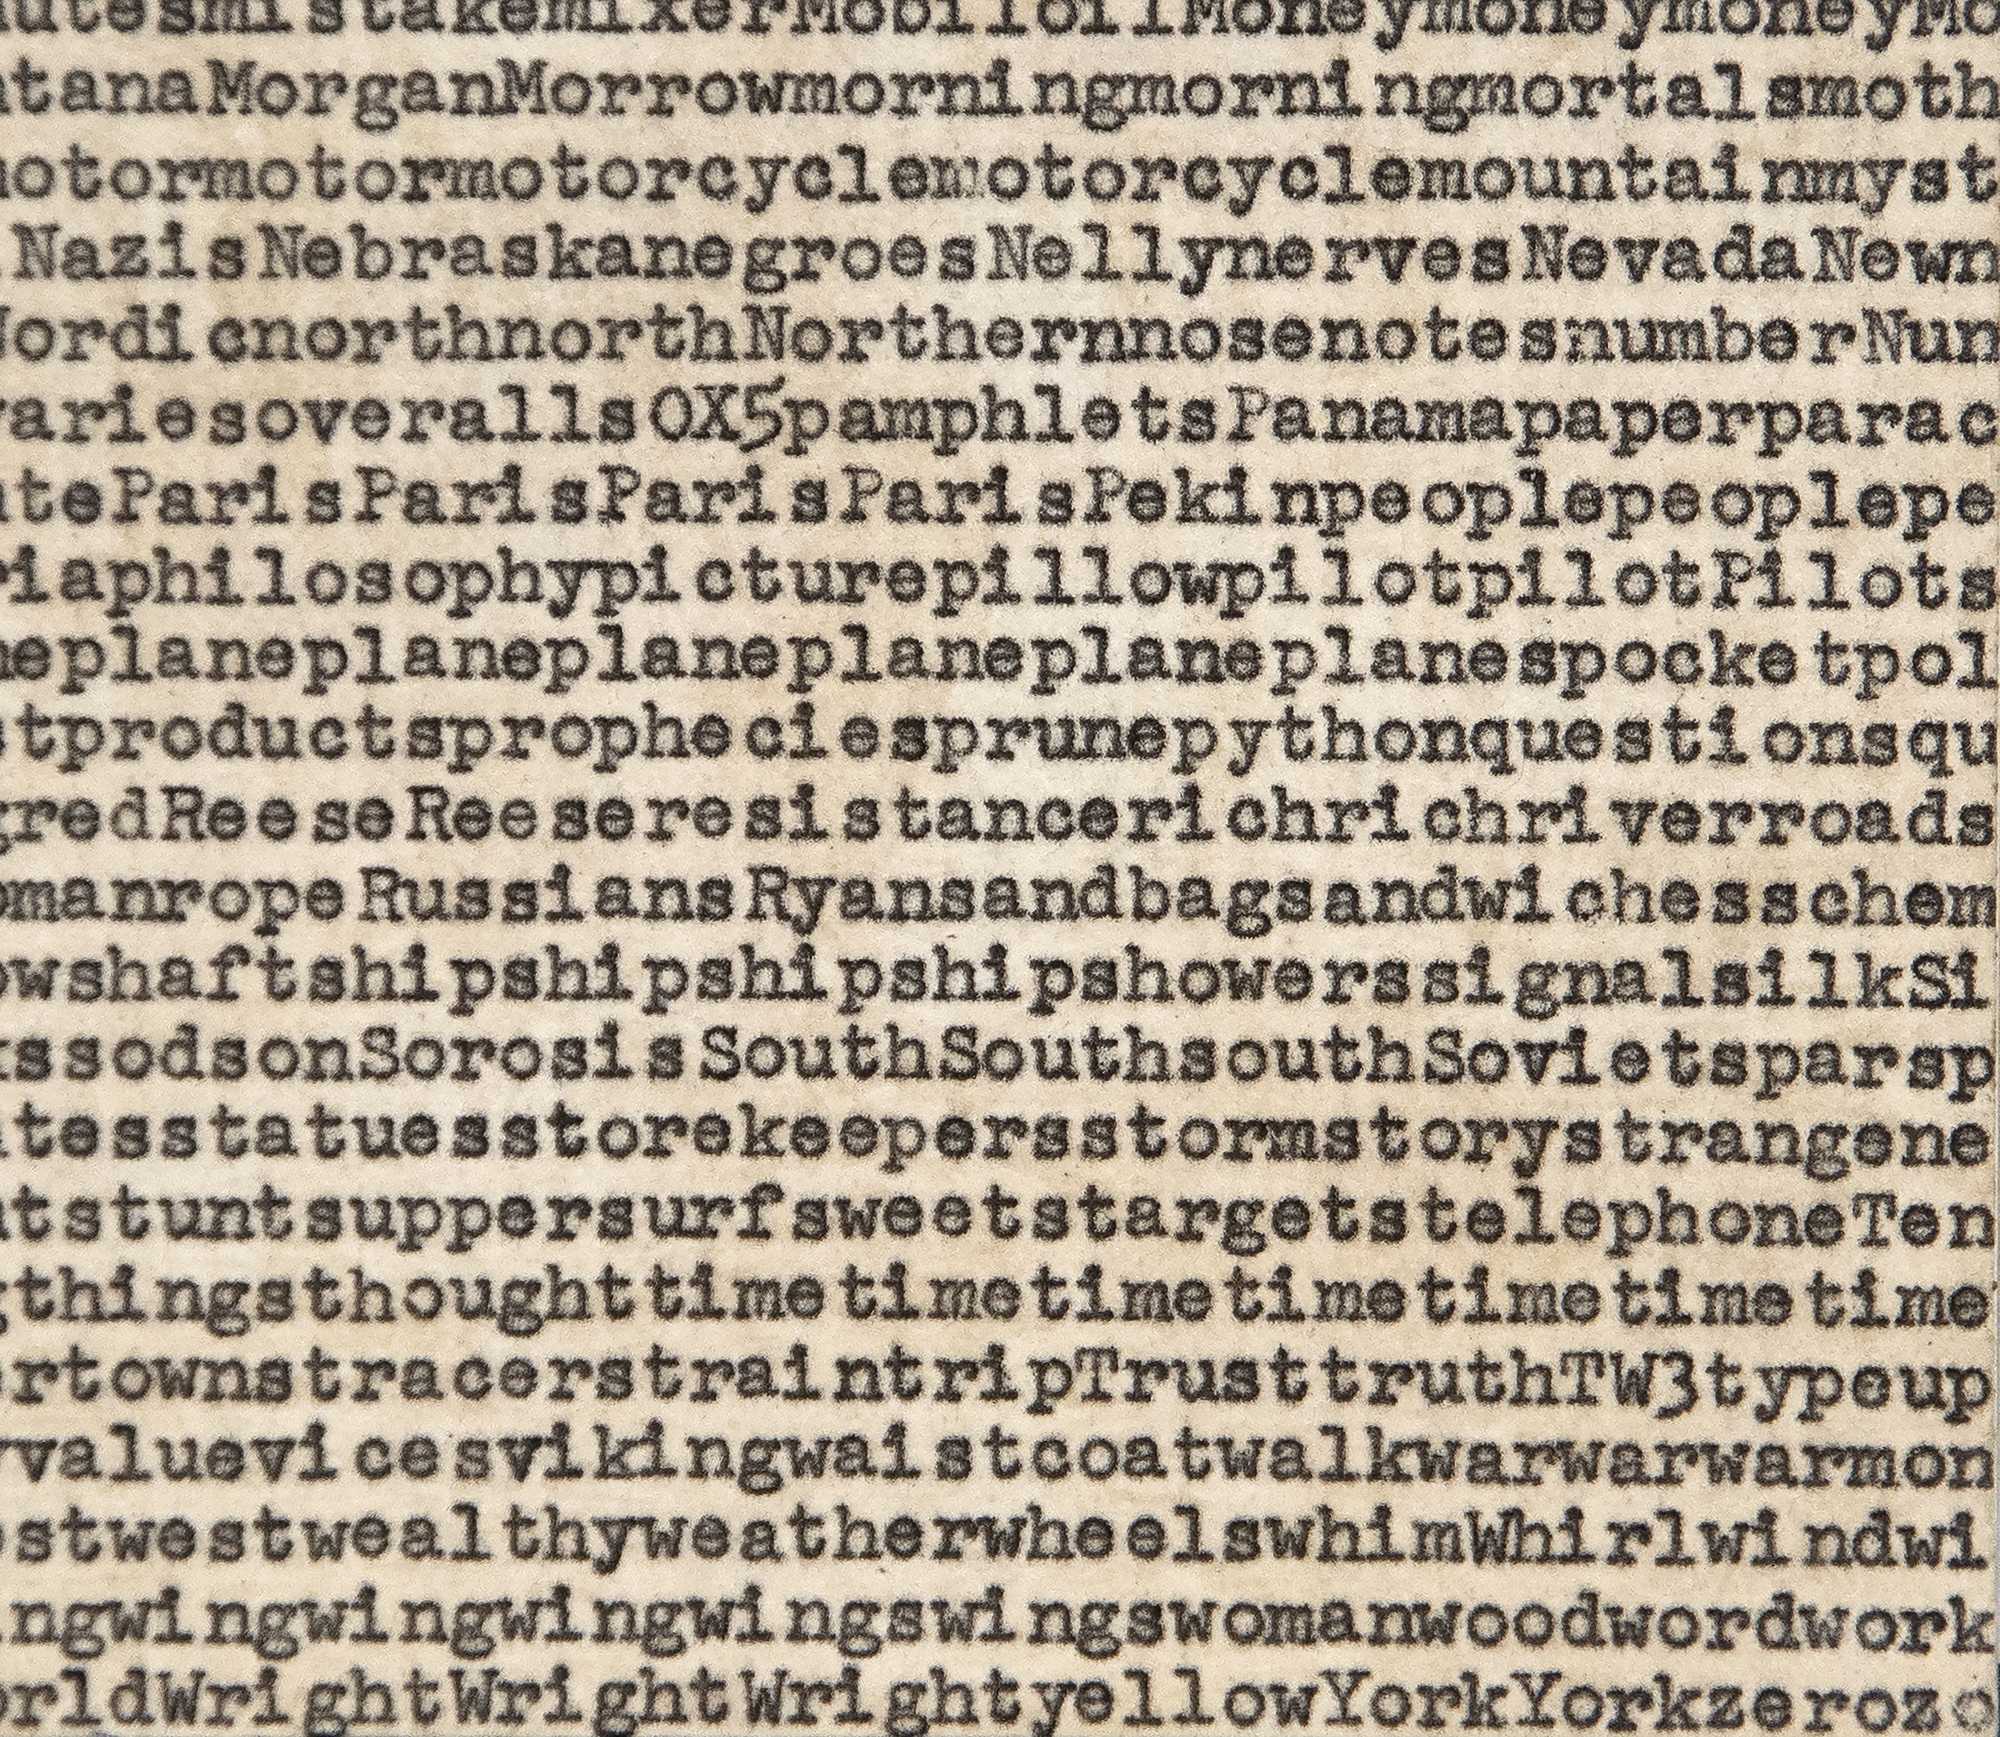 Carl Andre is an American artist who helped pioneer minimalist sculpture and was the husband of famed and celebrated artist Ana Mendieta. This is a classic text piece from the early 1960s and is typical of his poems which are composed by selecting individual words from source texts, and then ordering them on the page according to simple and self-evident criteria, which, in this case, is by alphabetical listing. Aviator Charles Lindbergh deep fascinated Carl Andre whom he returned to as a source for his poetry. This work with its structured repetition like his famed sculptures reflect the minimalism and post-minimalism emerging in the 1960s and the 1970s including fellow concrete poet Christopher Knowles.